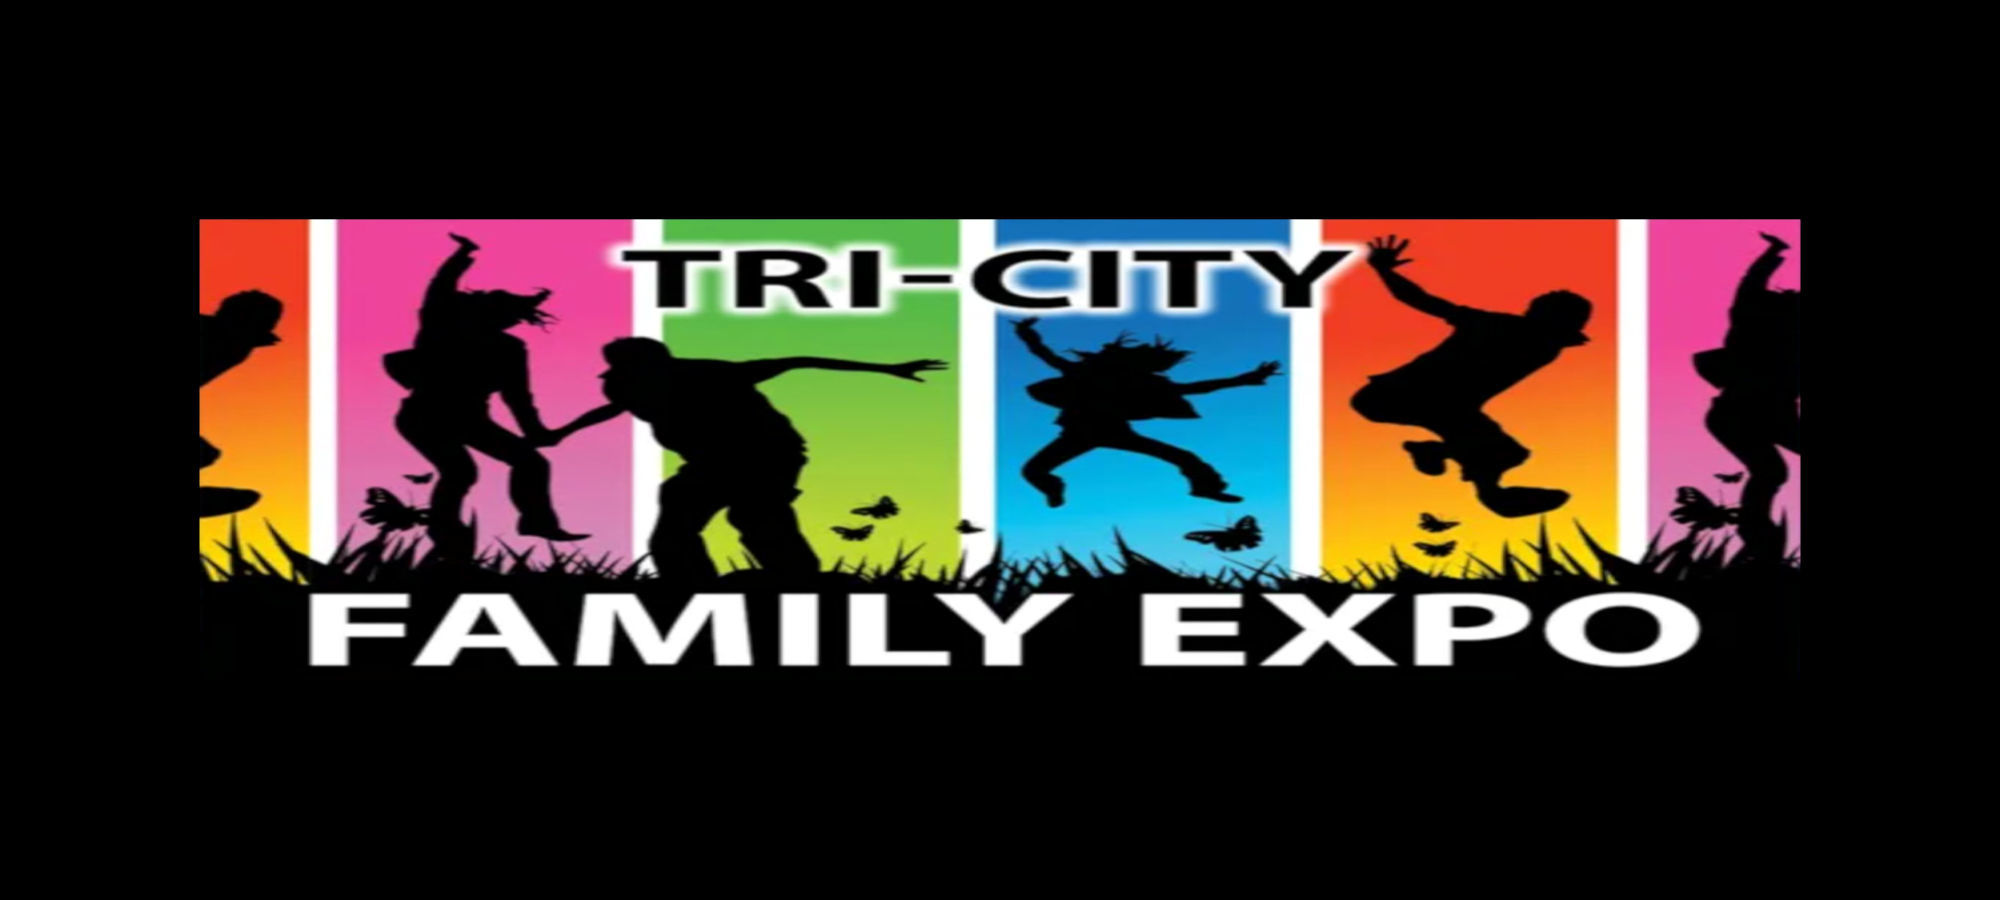 The Tri-City Family Expo in Pasco Washington. Join us for a weekend of wholesome family fun at the HAPO Center in Pasco! "Community, Connection & Purpose!"